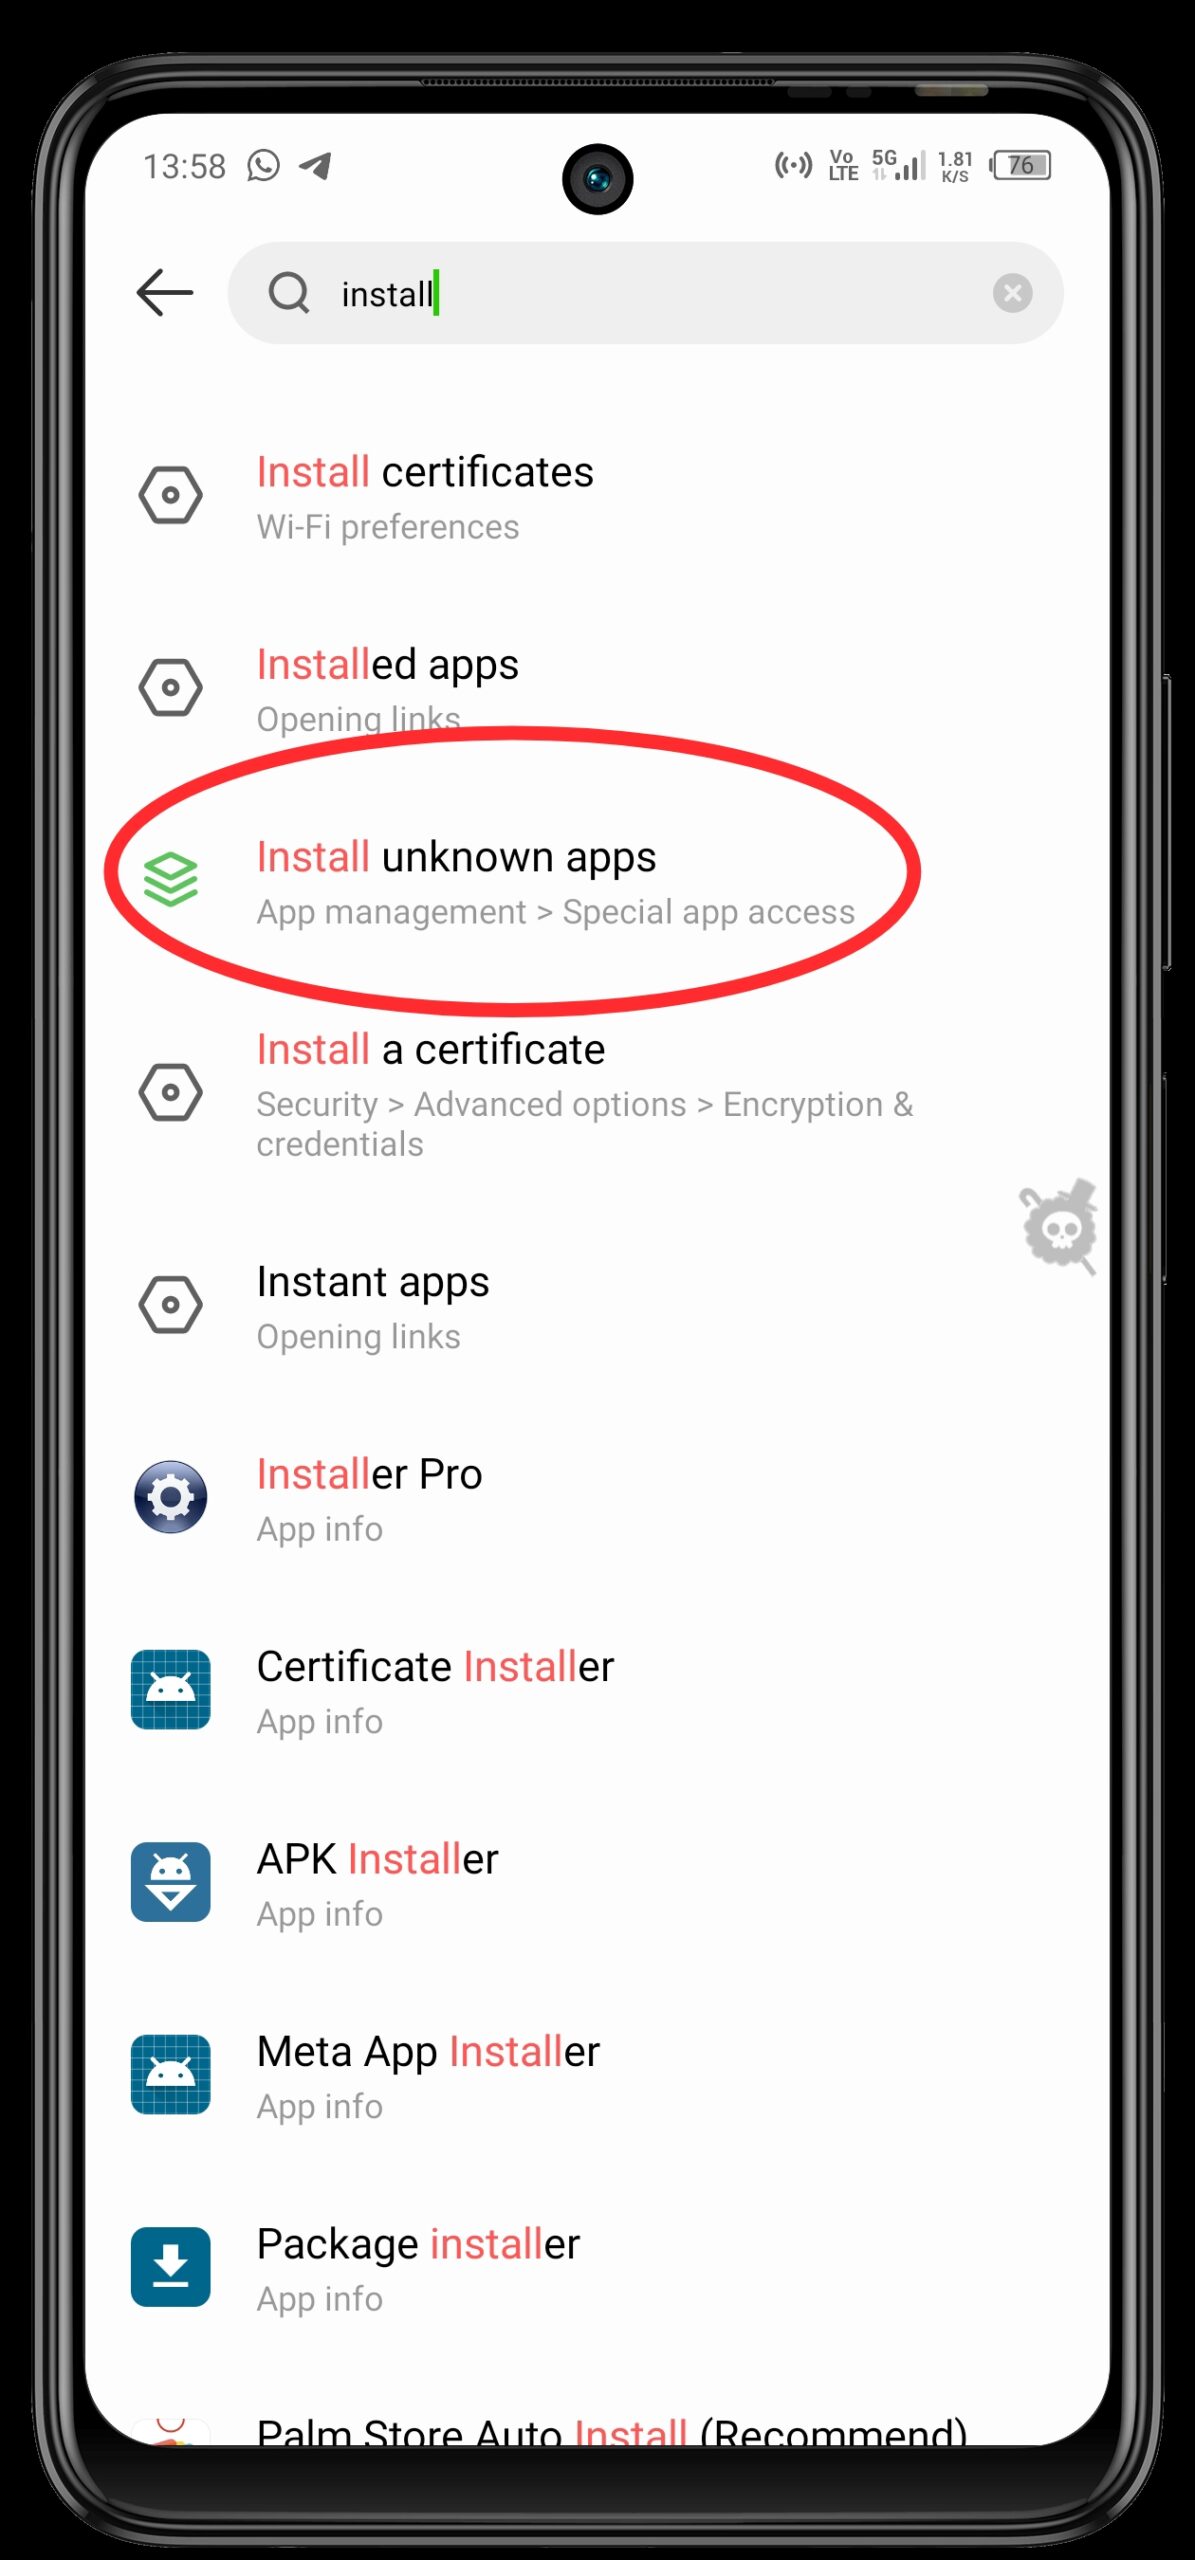 Install Unknown Apps option on settings